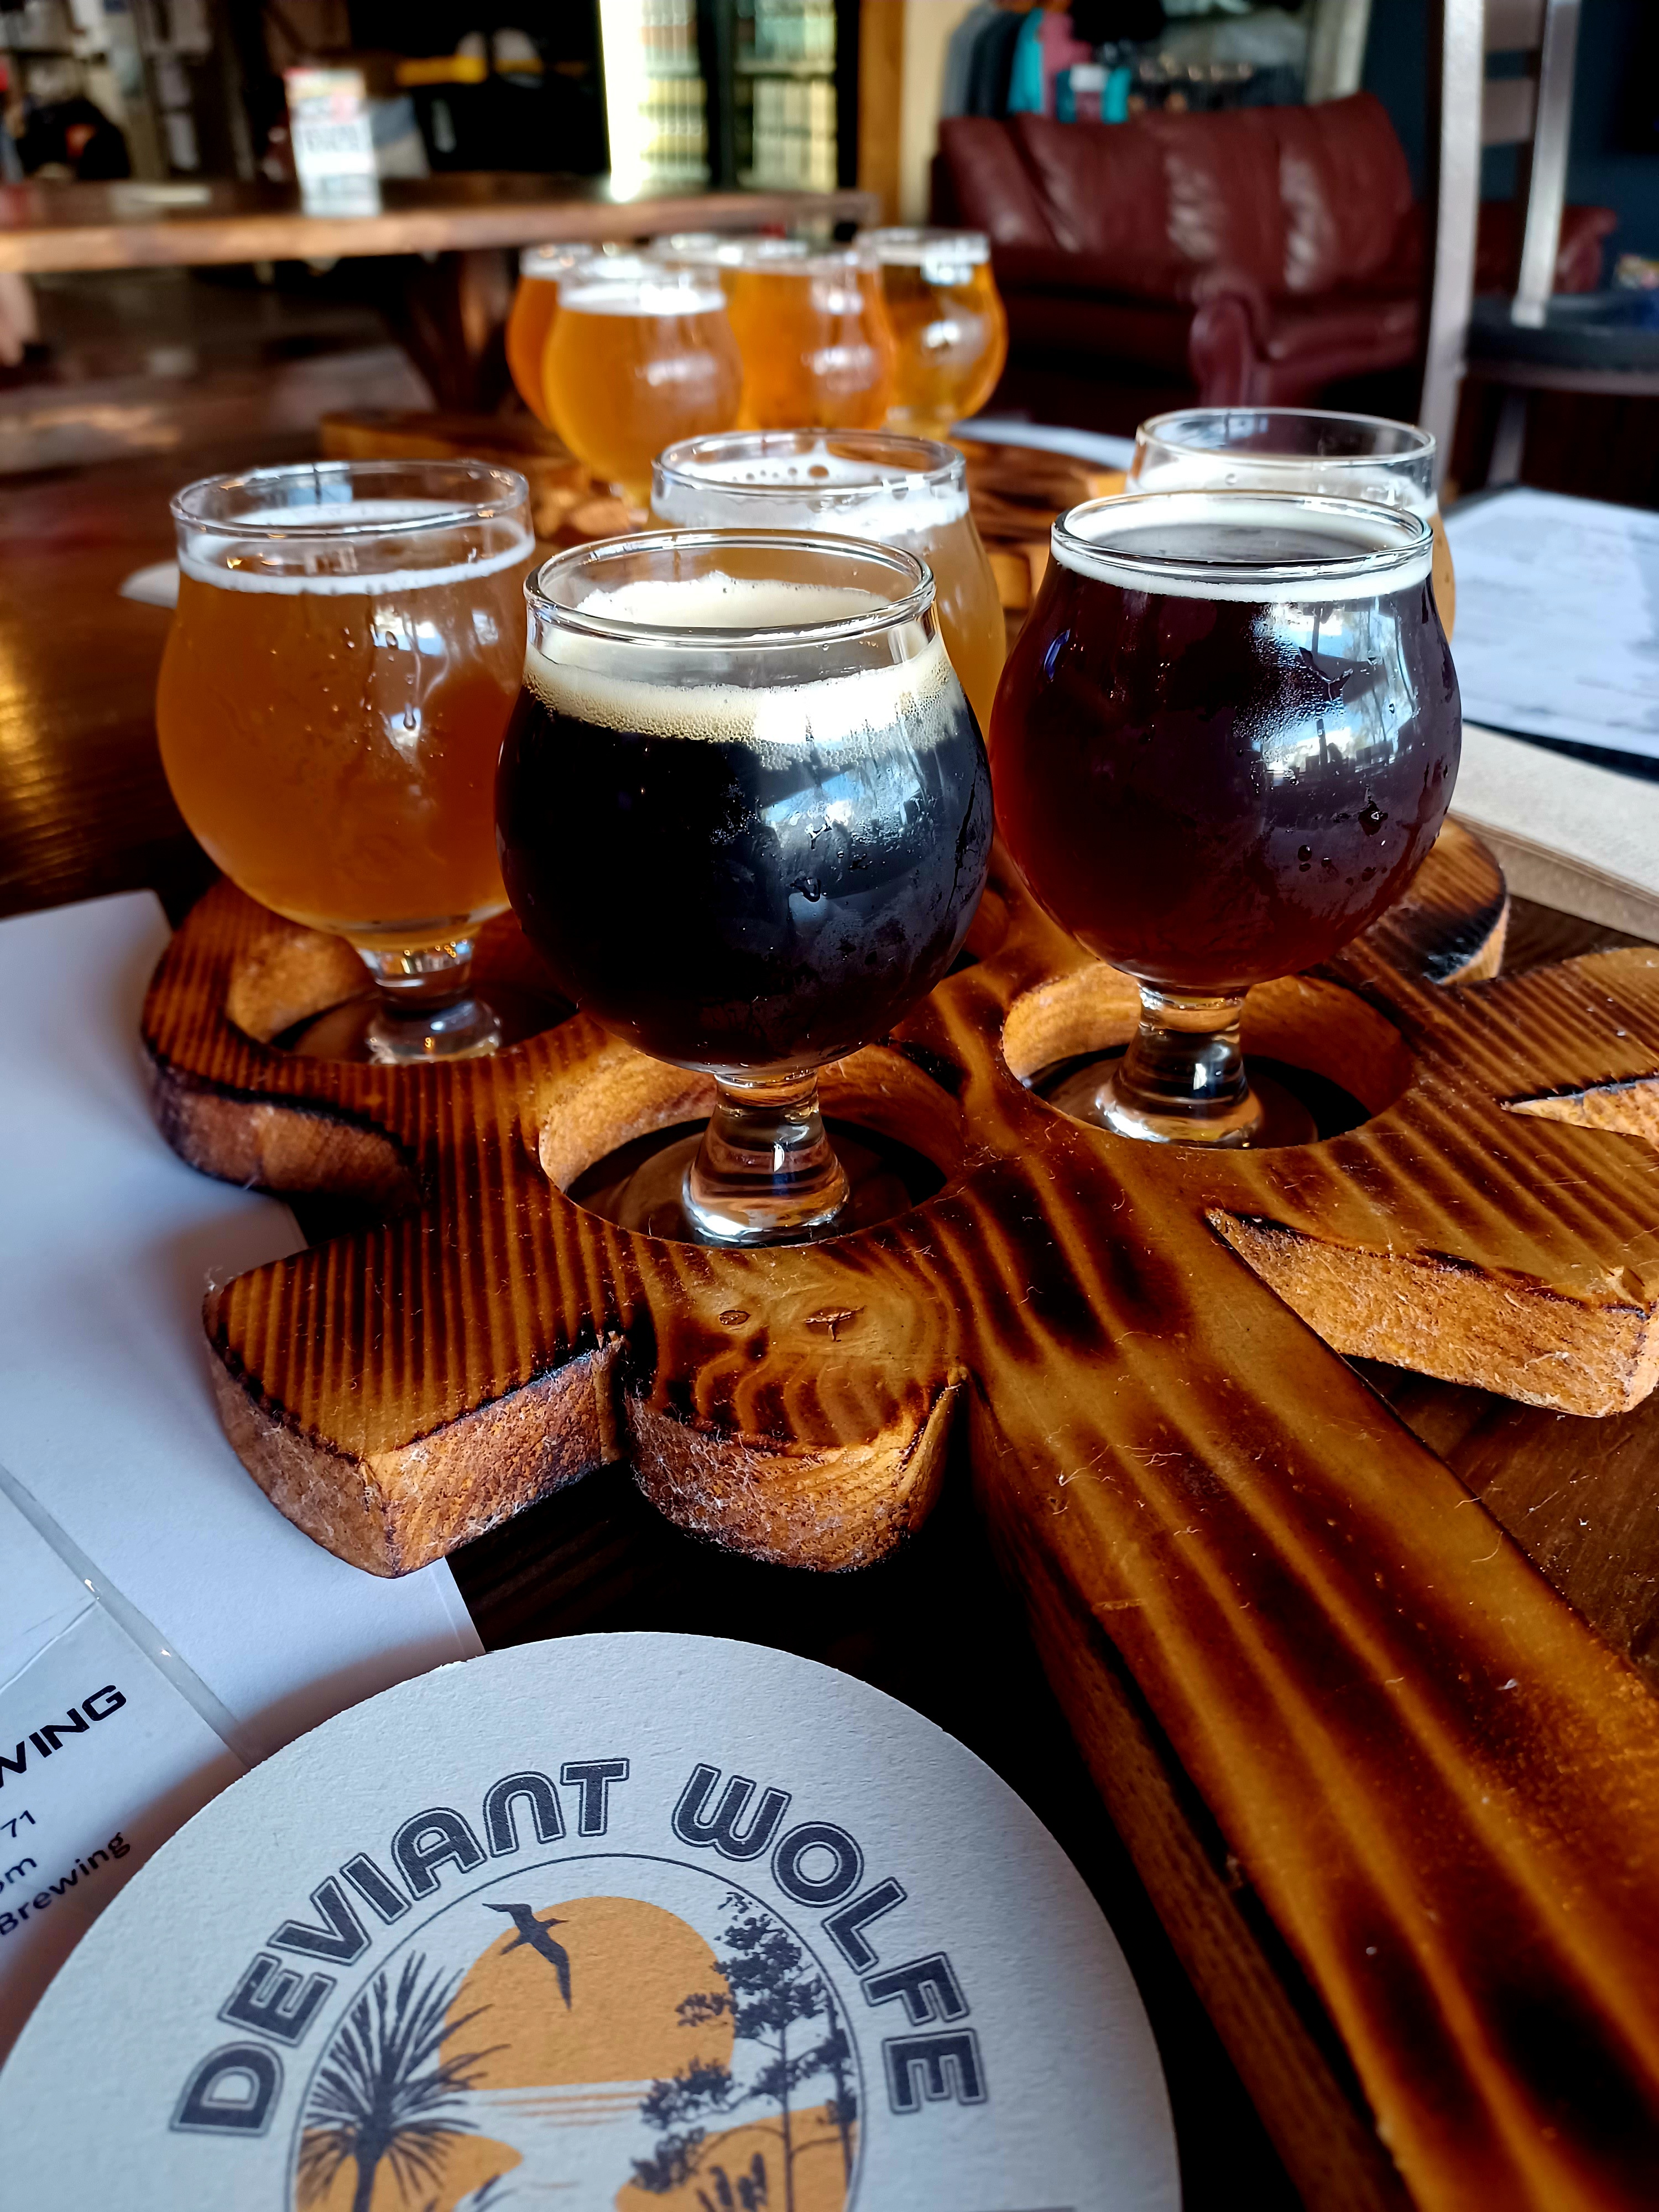 A five-beer flight from Sanford's Deviant Wolfe Brewing allows guests to sample the available styles. (Amy Drew Thompson/Orlando Sentinel)